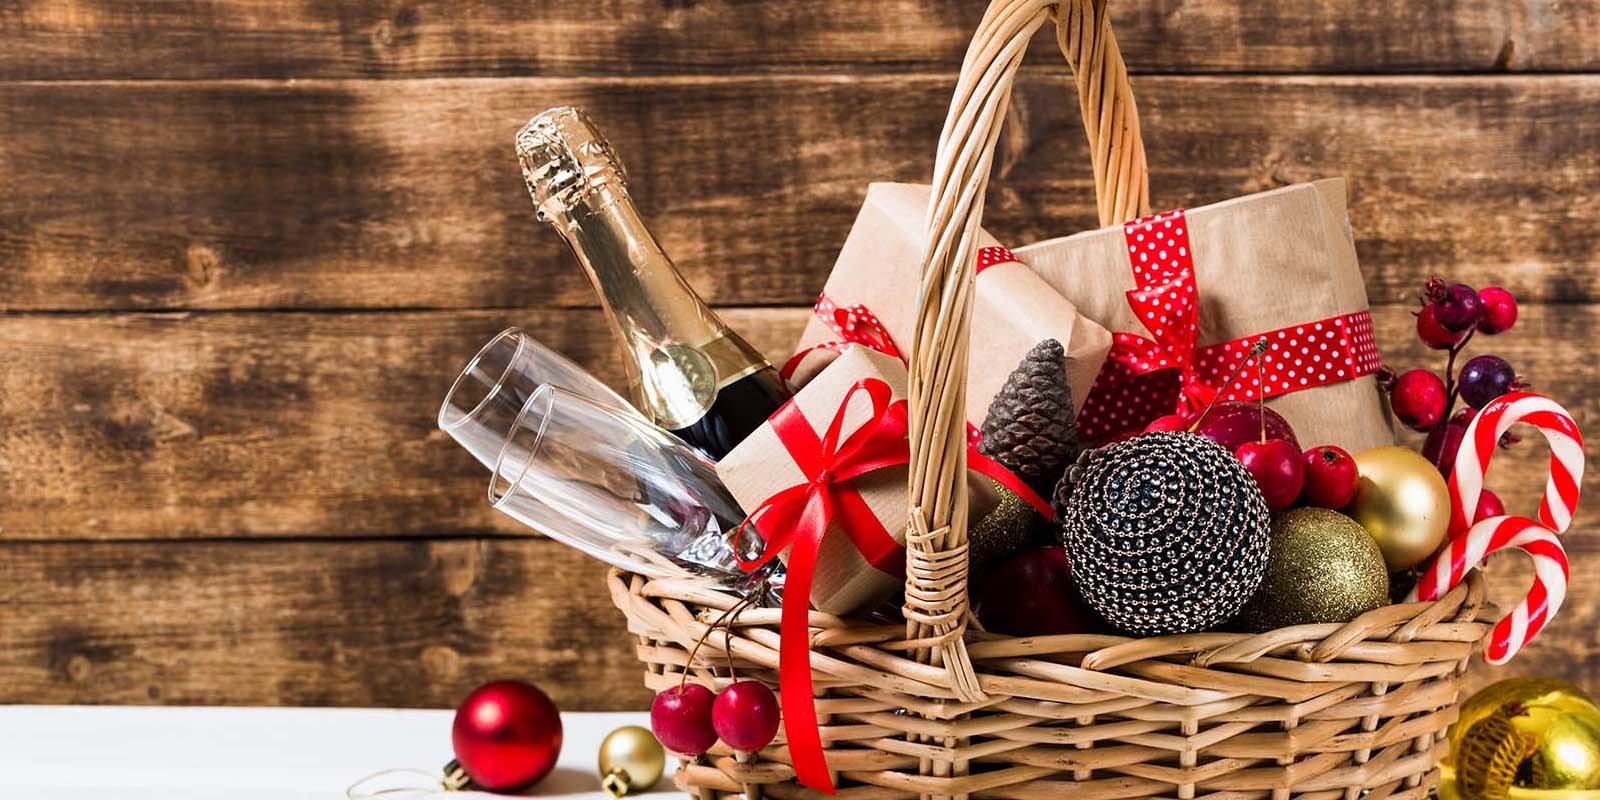 Chocolate Boxes & Champagne Gift Basket - SendGiftBasket - Delivering Gifts  Across Europe